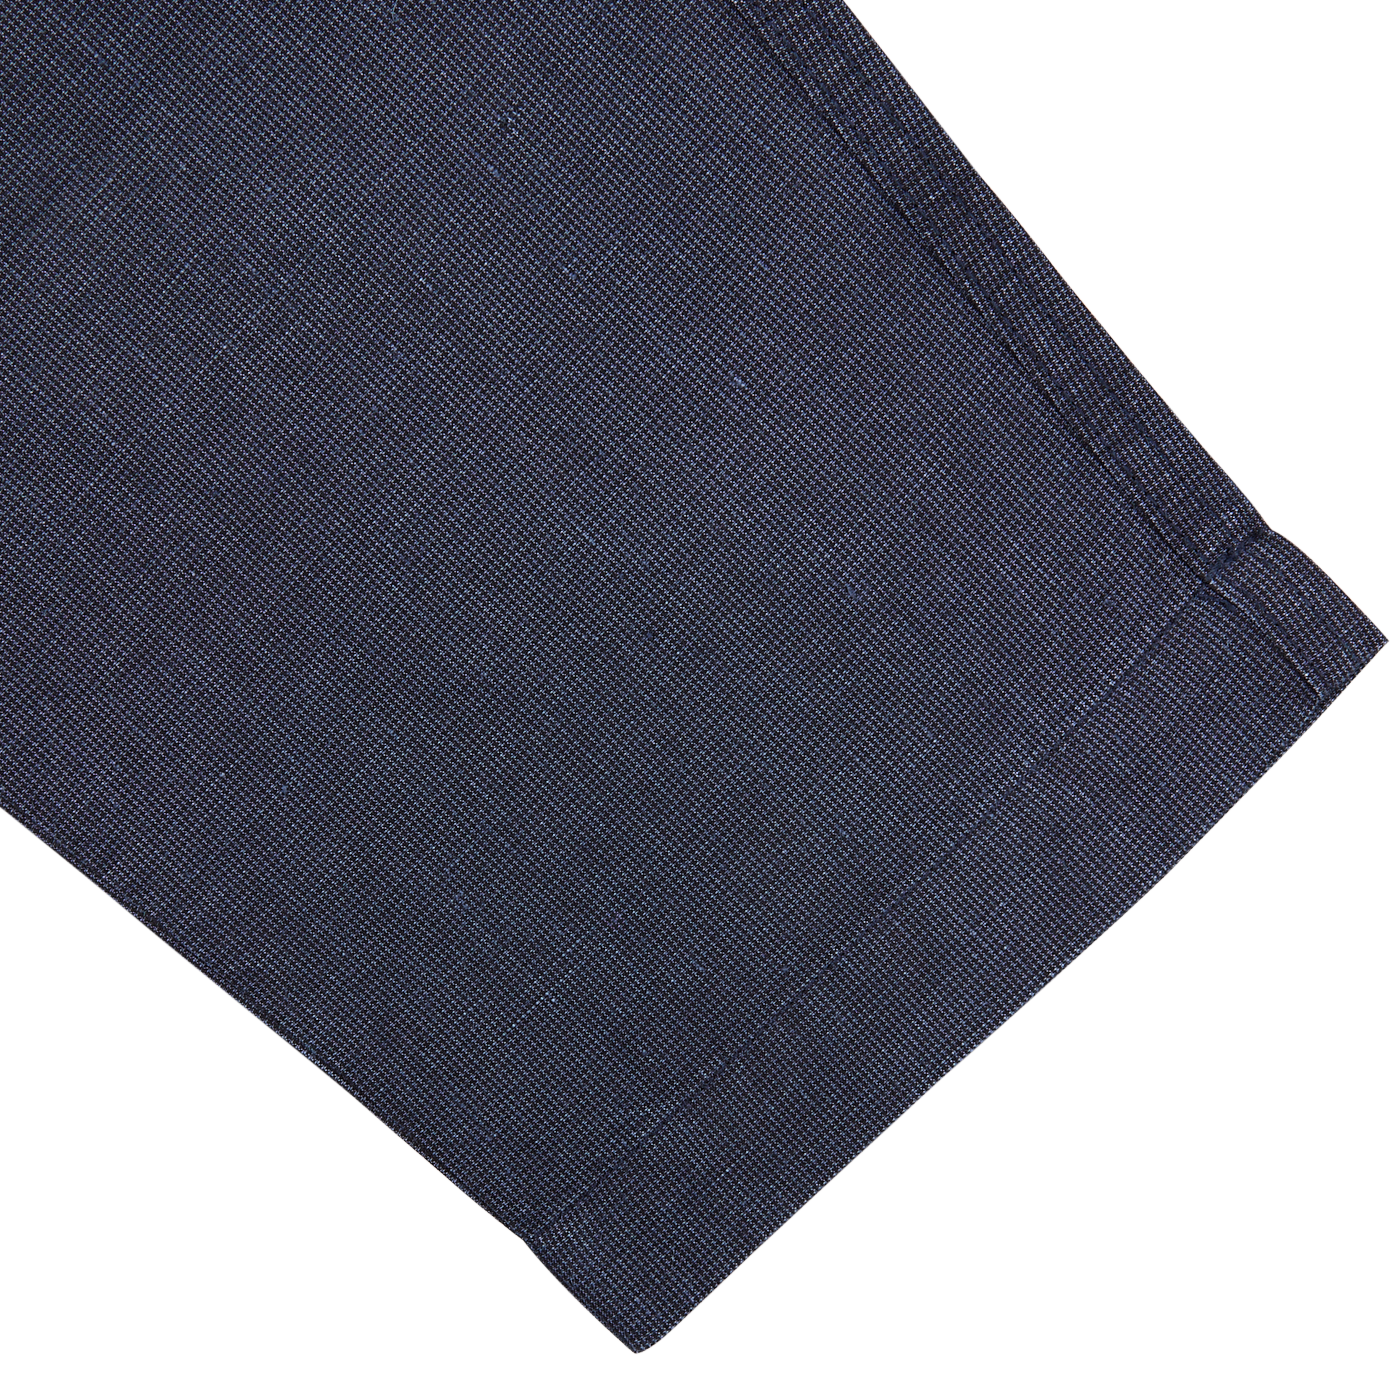 Navy blue cotton fabric with a hem on the edge against a white background.